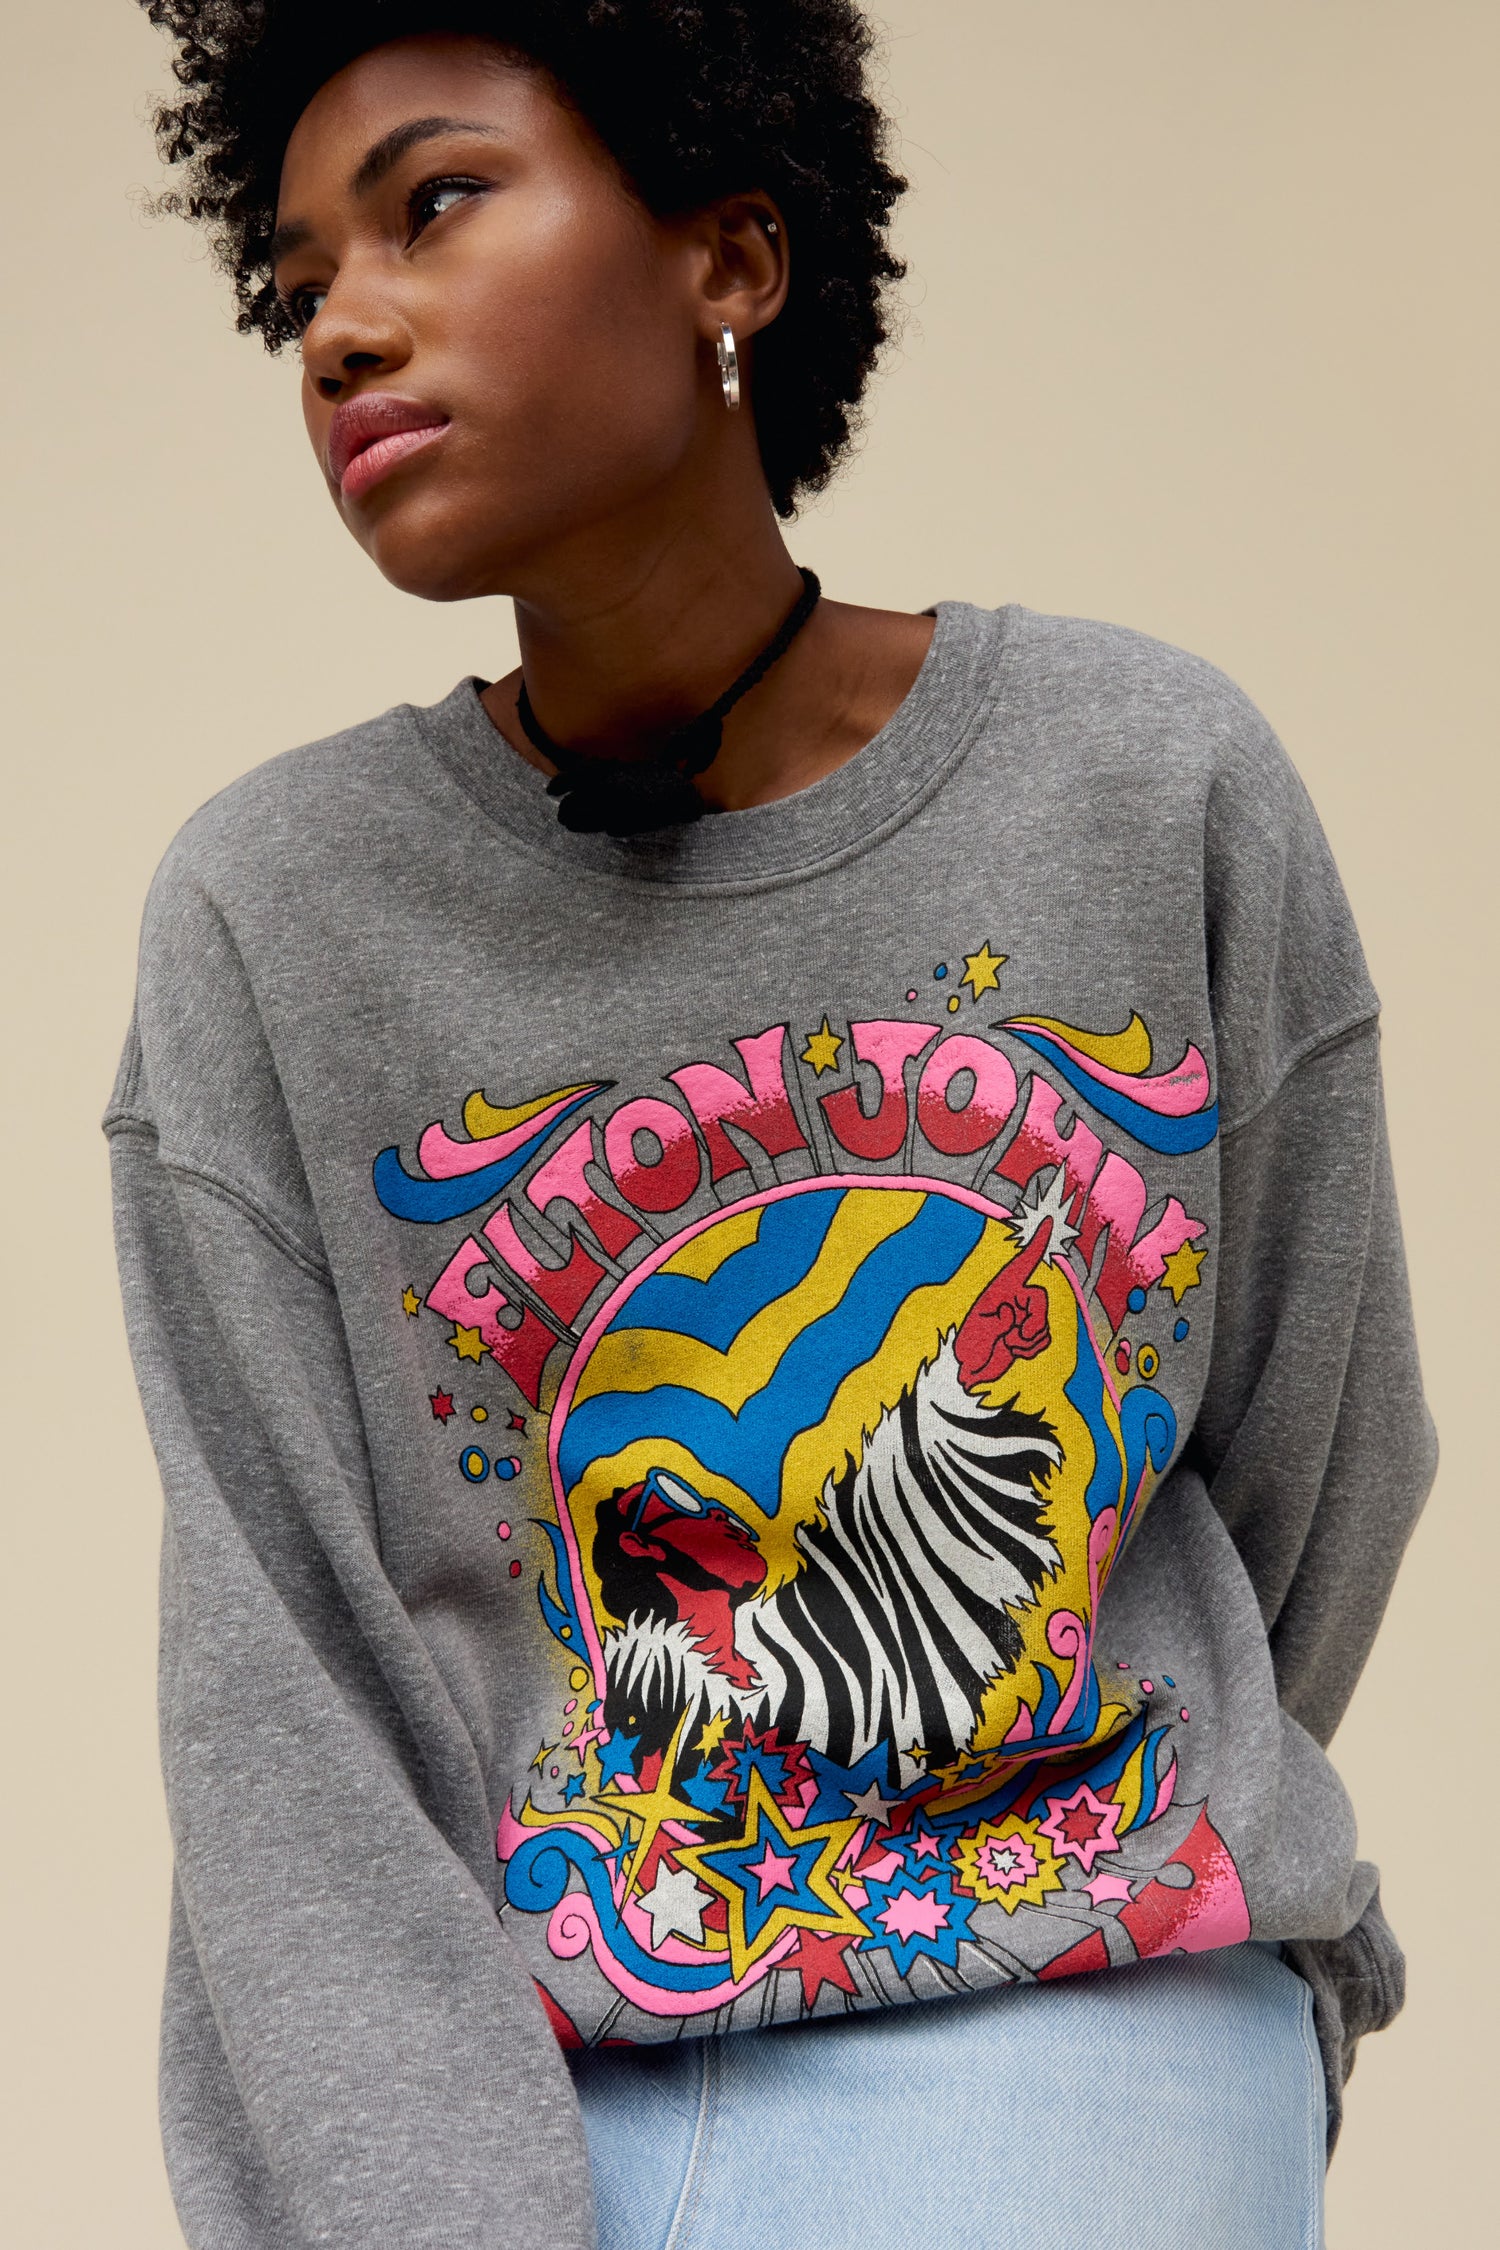 A model featuring a gray long sleeve stamped with Elton John and a graphic of a man and stars.